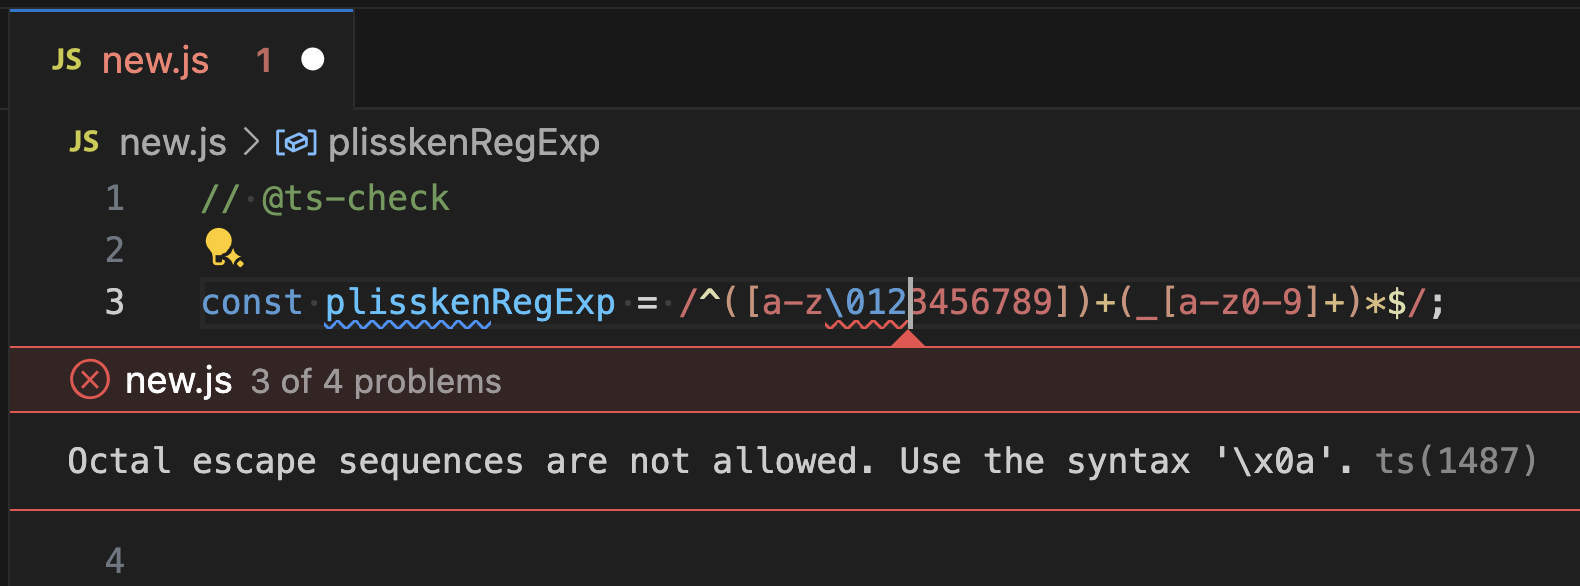 Editor showing a regex error for an invalid escape sequence